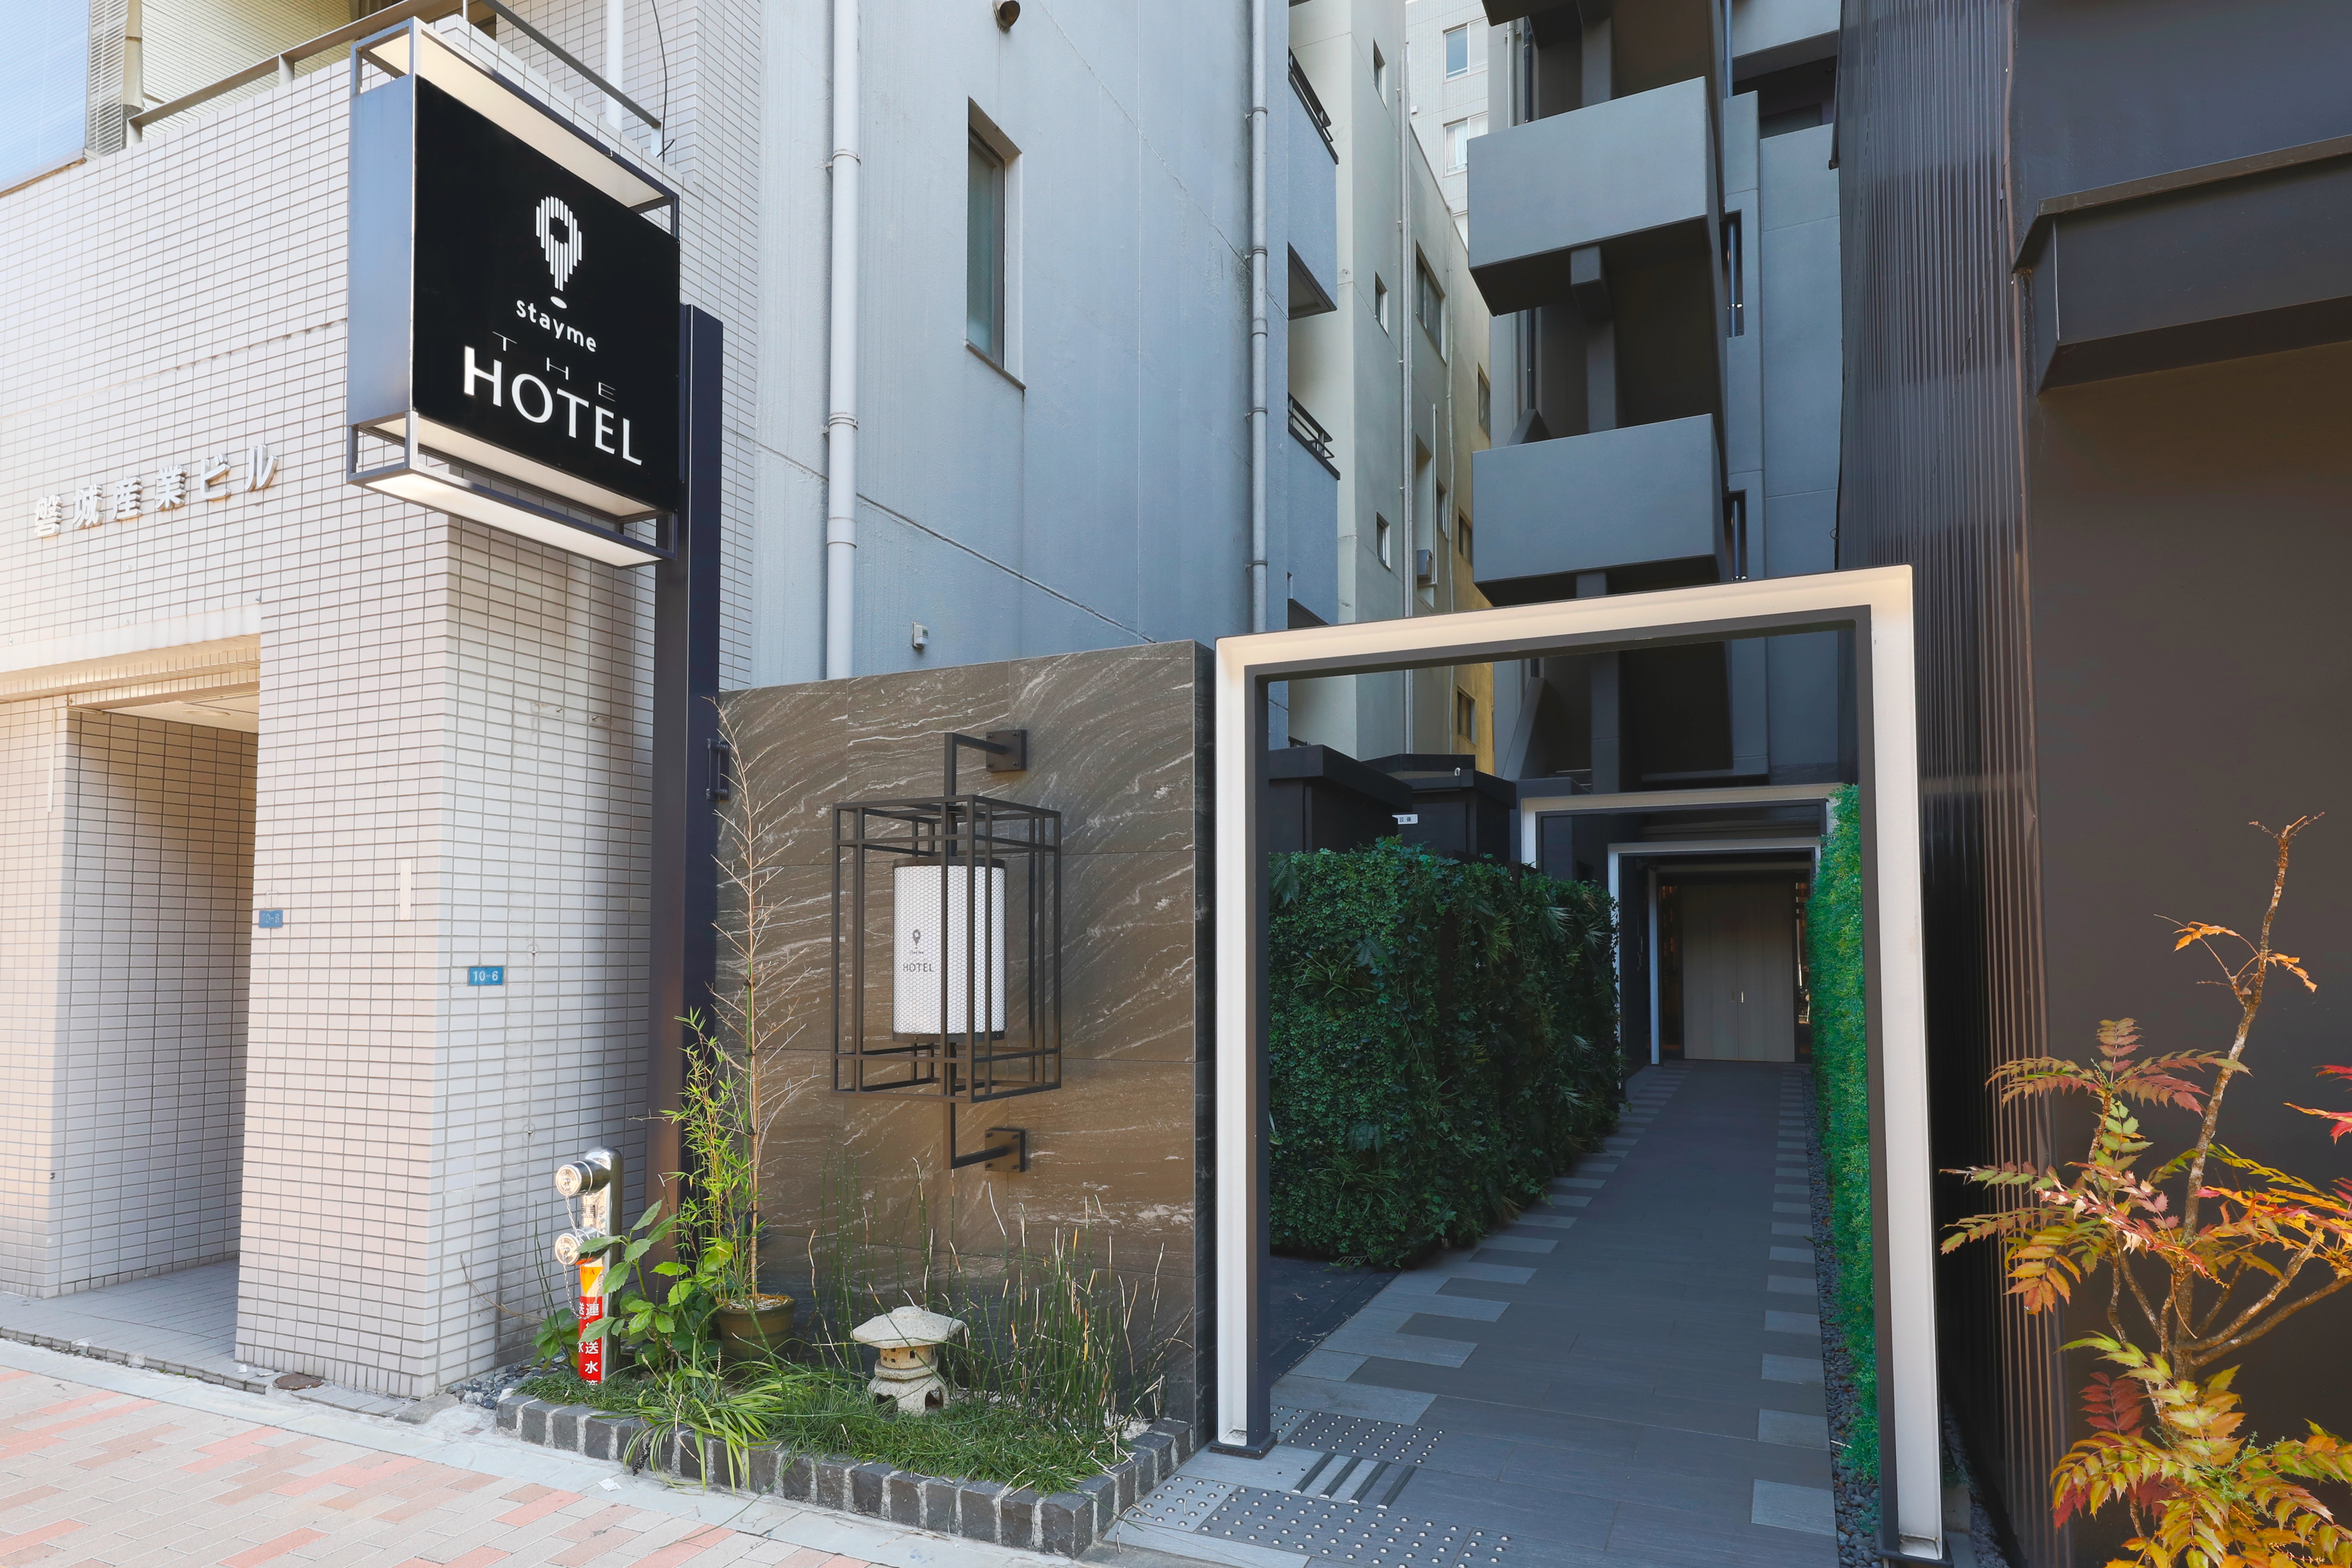 stayme THE HOTEL 上野駅前